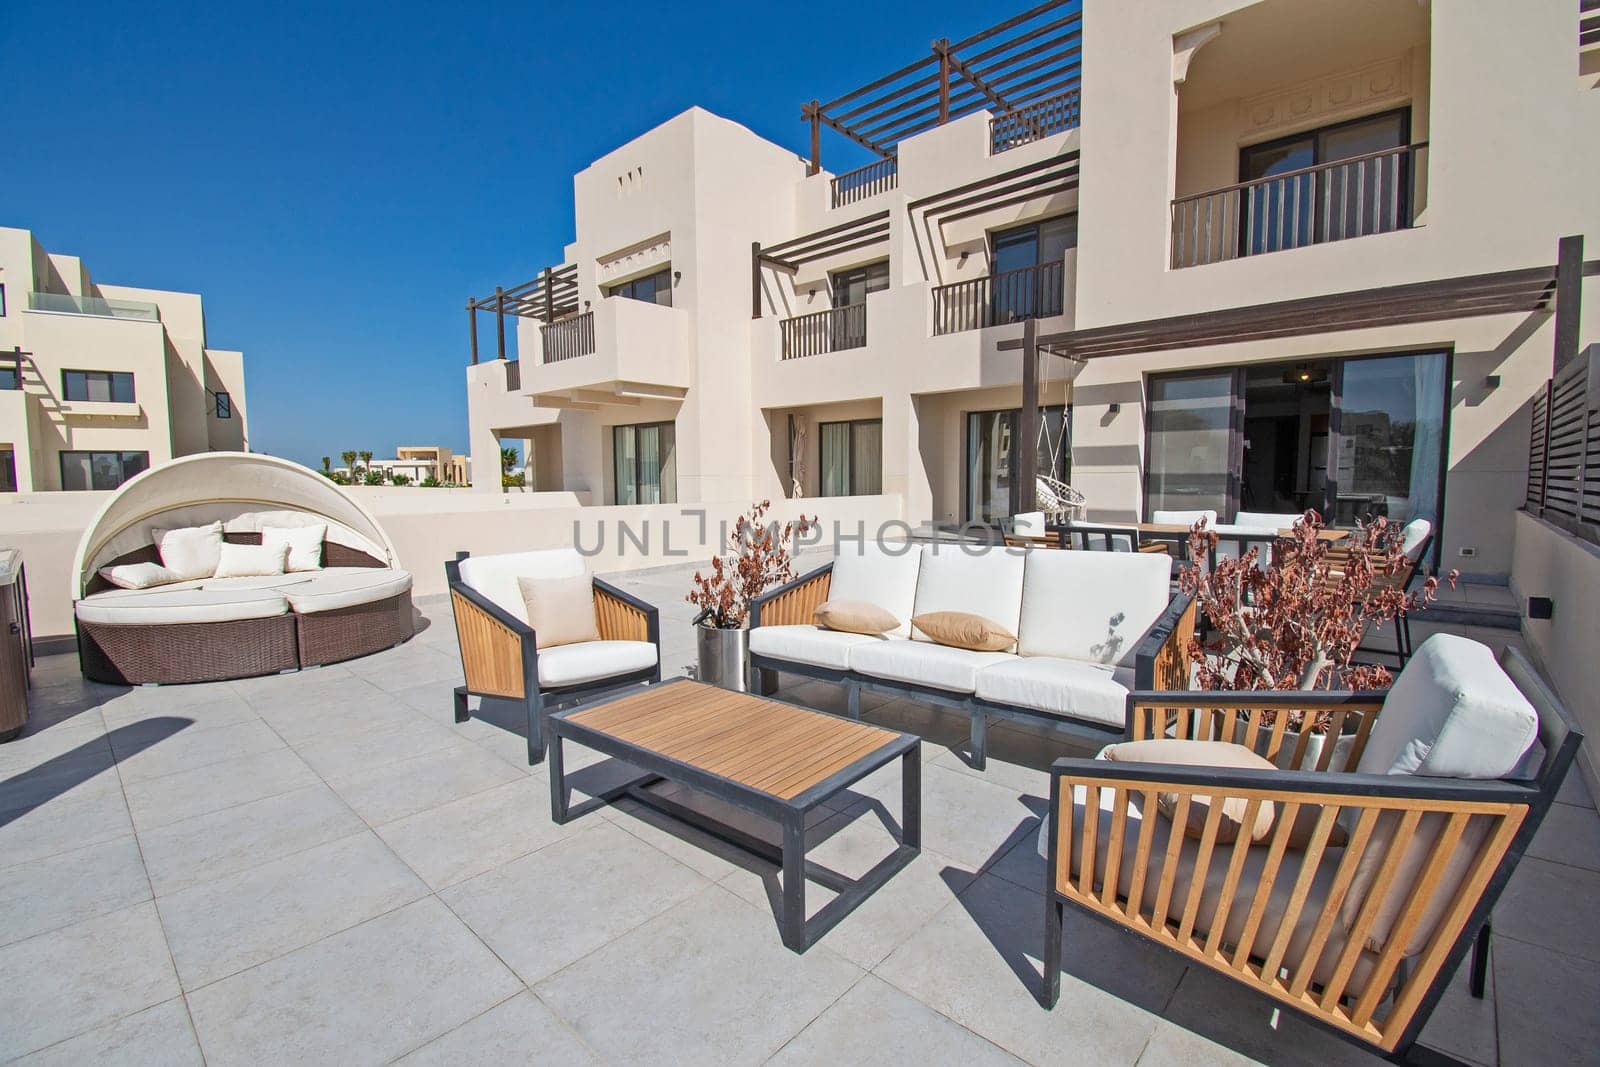 Roof terrace patio furniture at a luxury holiday villa in tropical resort with table and chairs